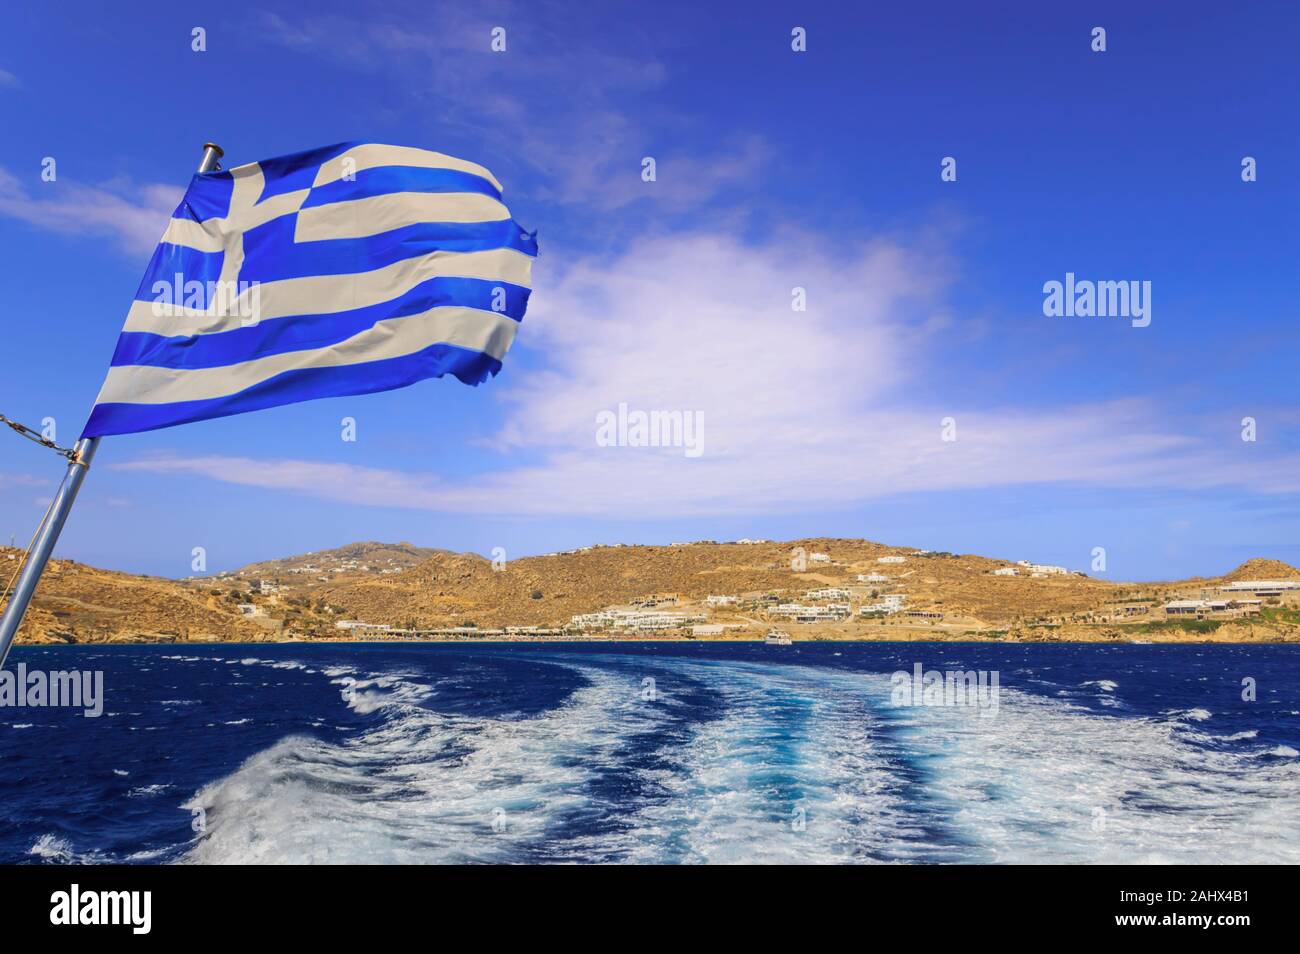 Discovering the Greek islands. Horizon with ship wake and the Greek flag: island of Mykonos in the far. Stock Photo